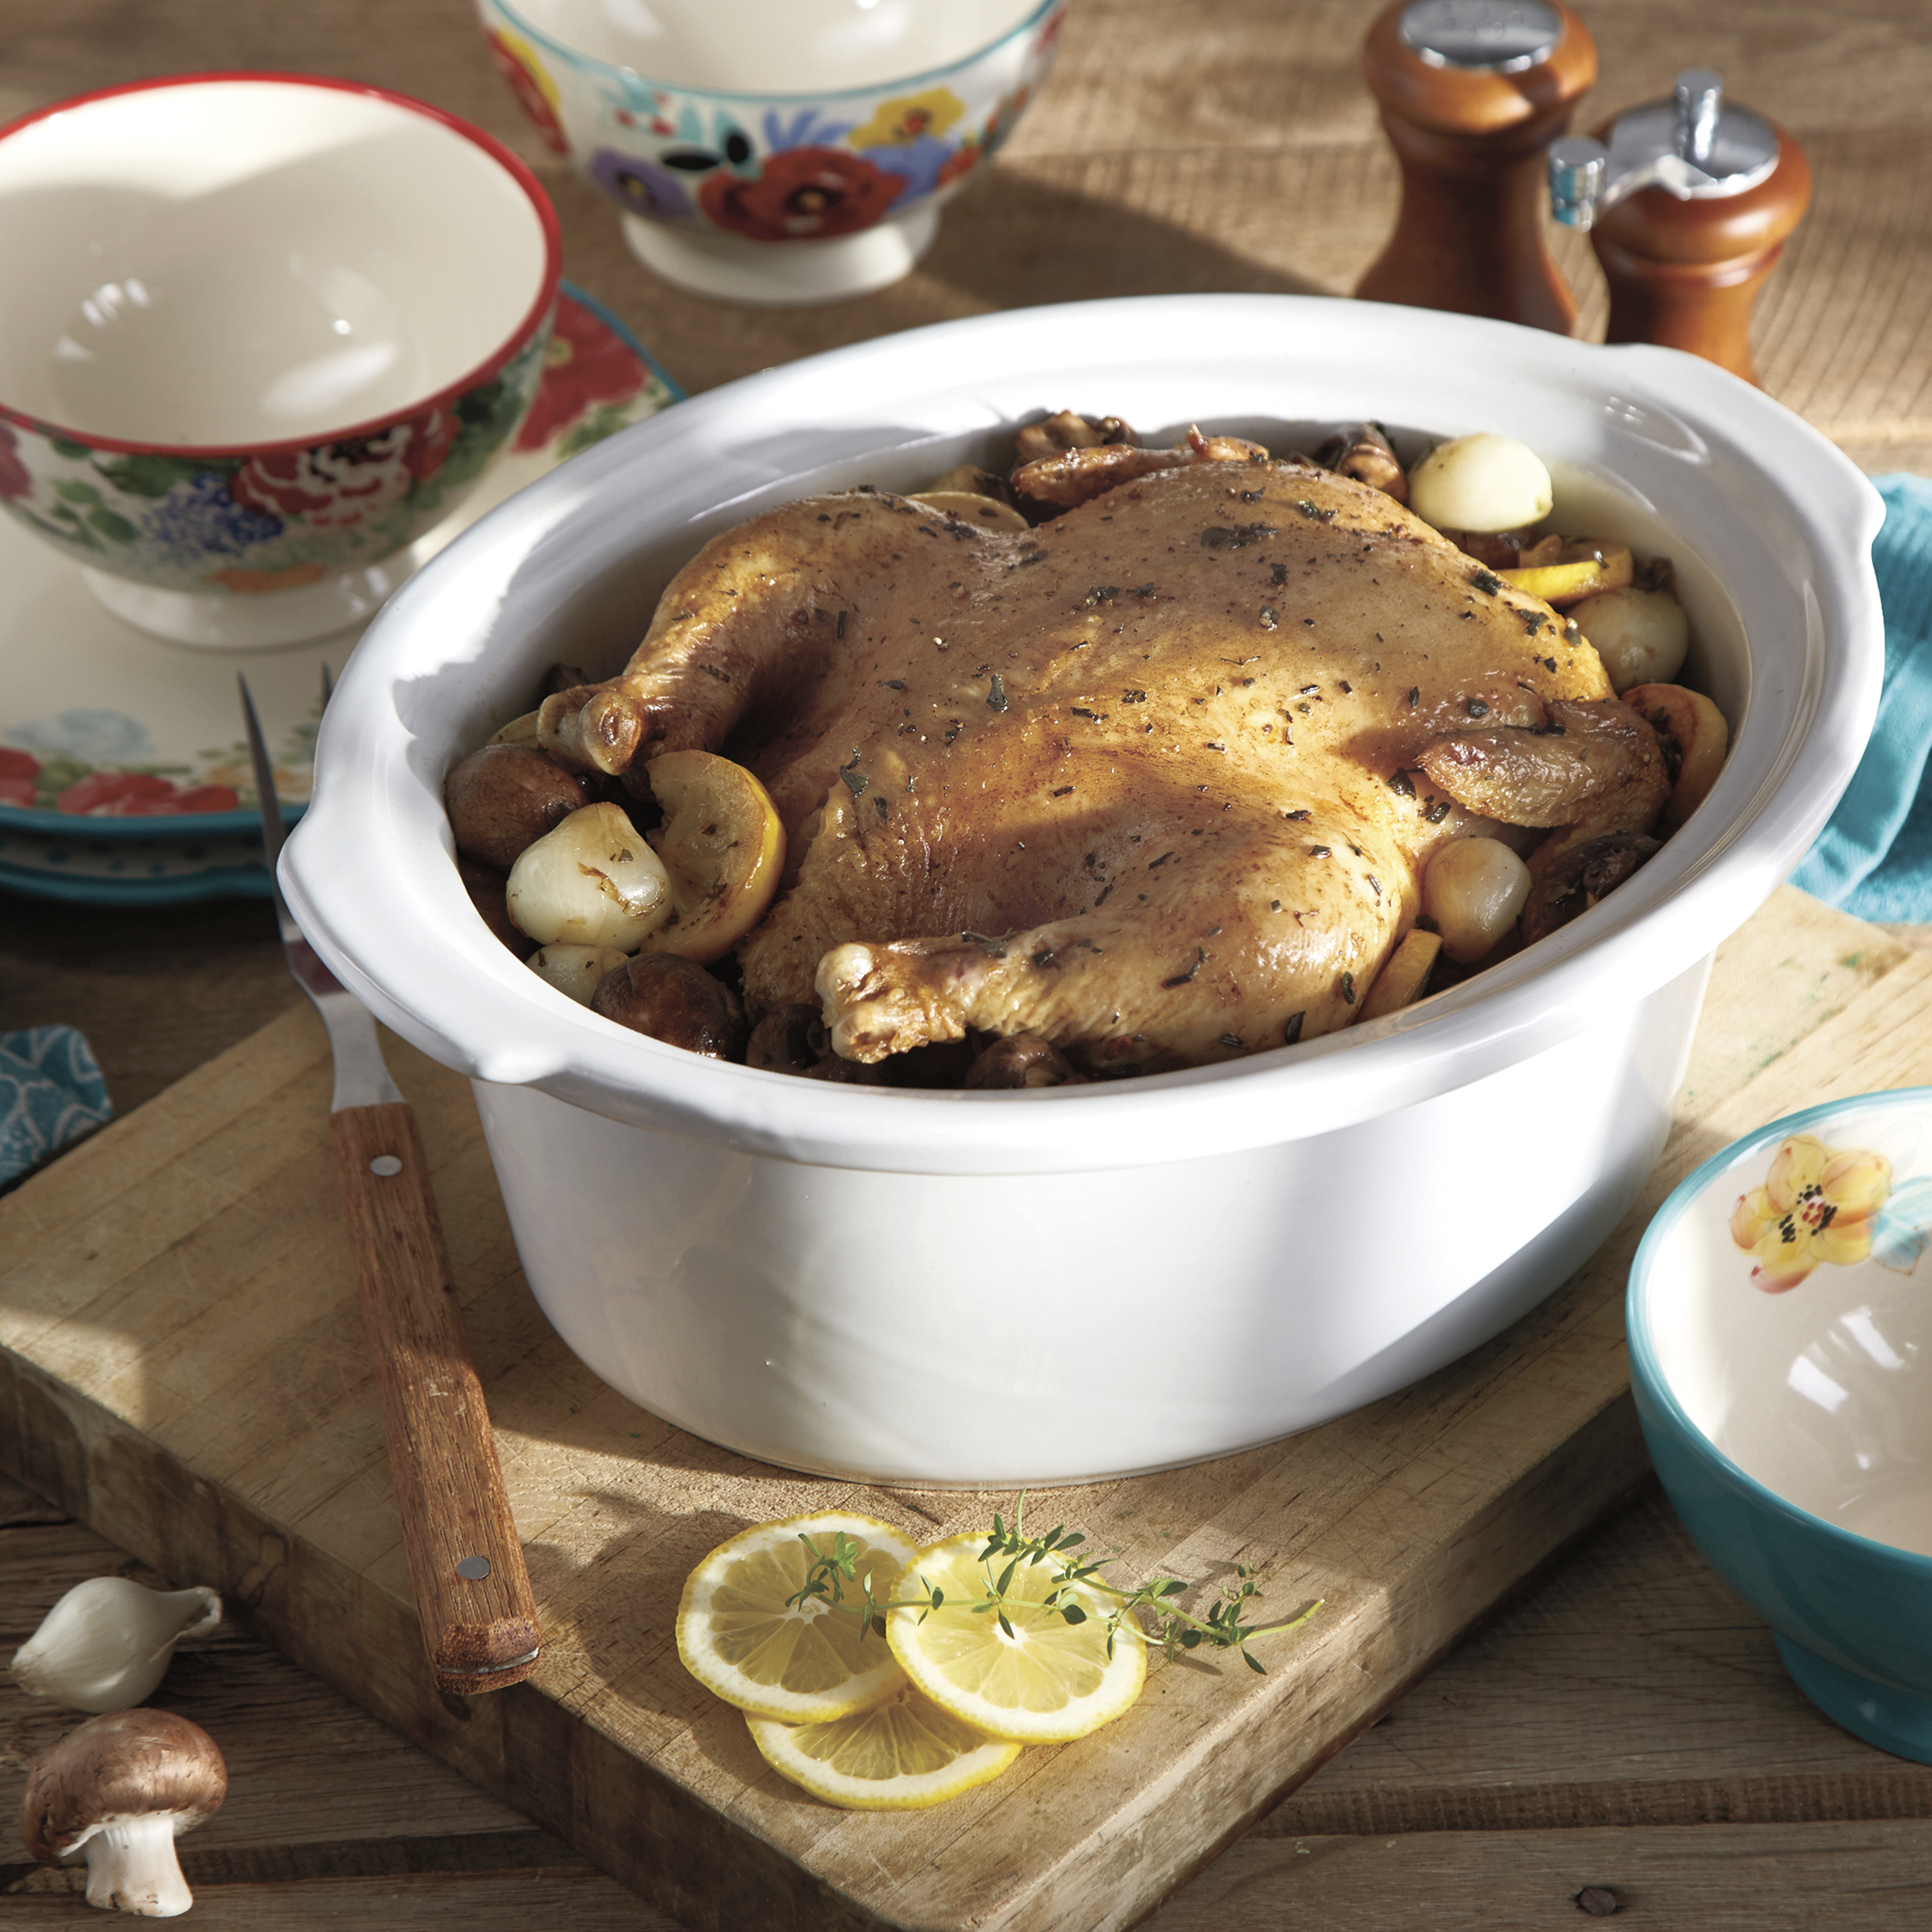 The Pioneer Woman Programmable Slow Cooker, 7 Quart Capacity, Removable Crock, Frontier Rose, 33679 - image 2 of 4